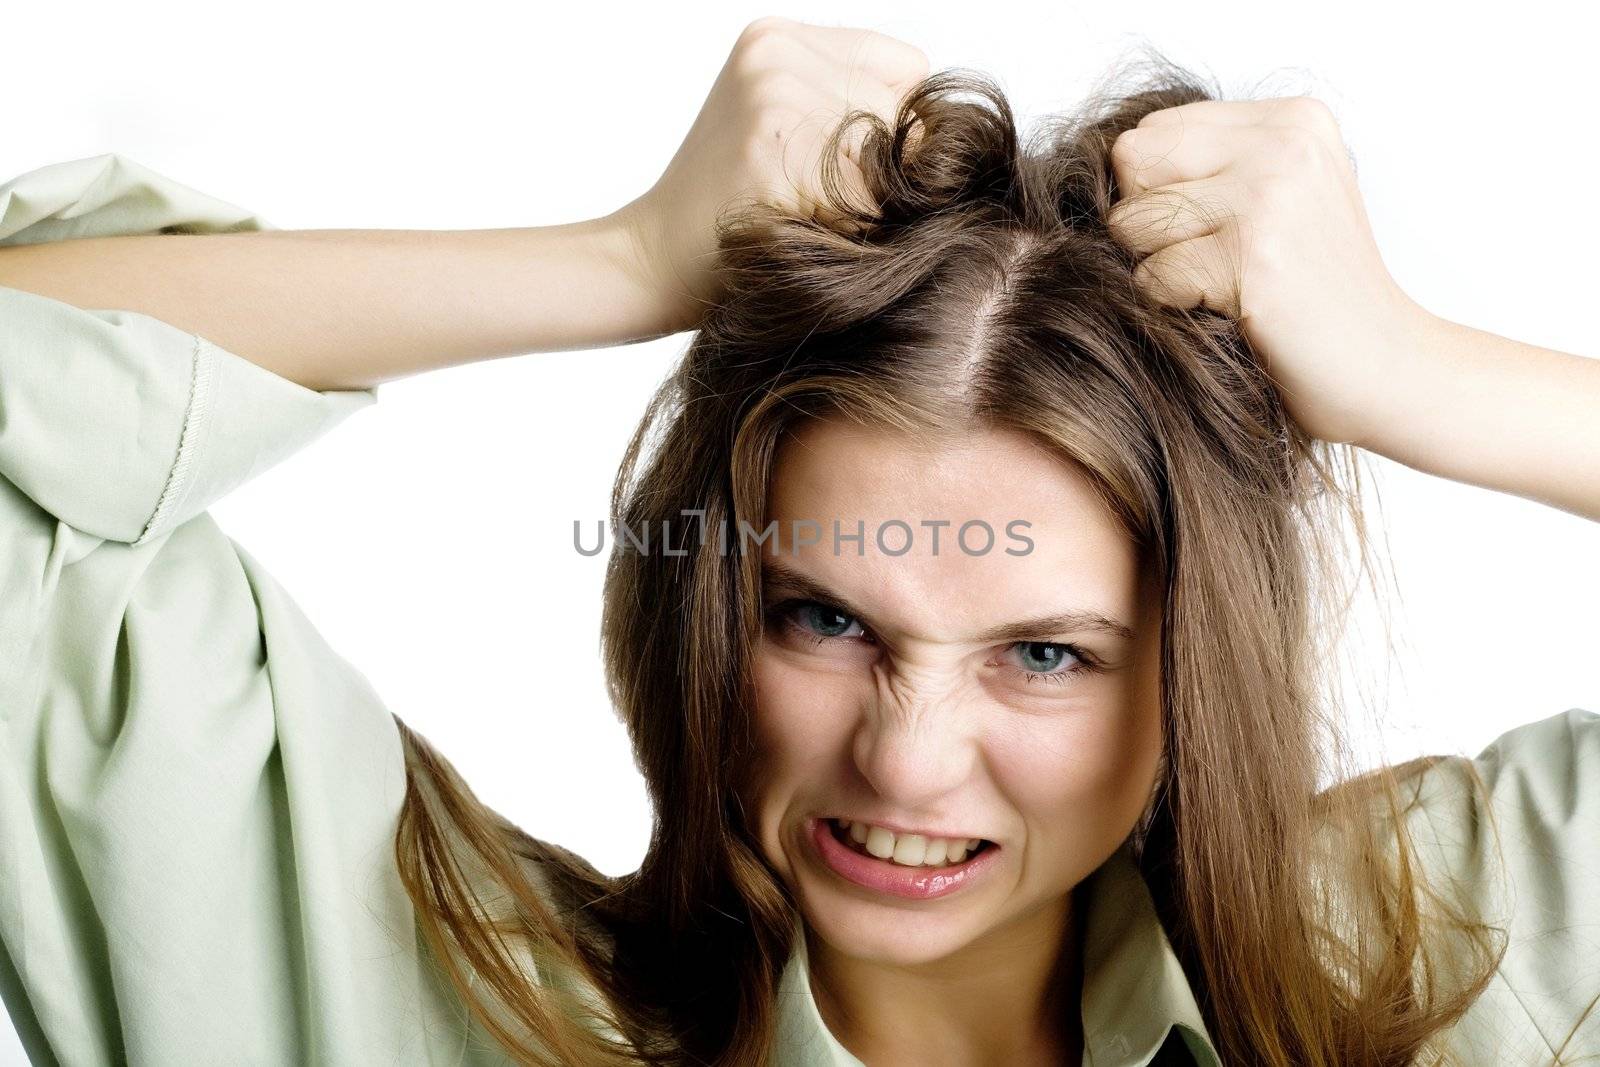 An image of a portrait of angry girl